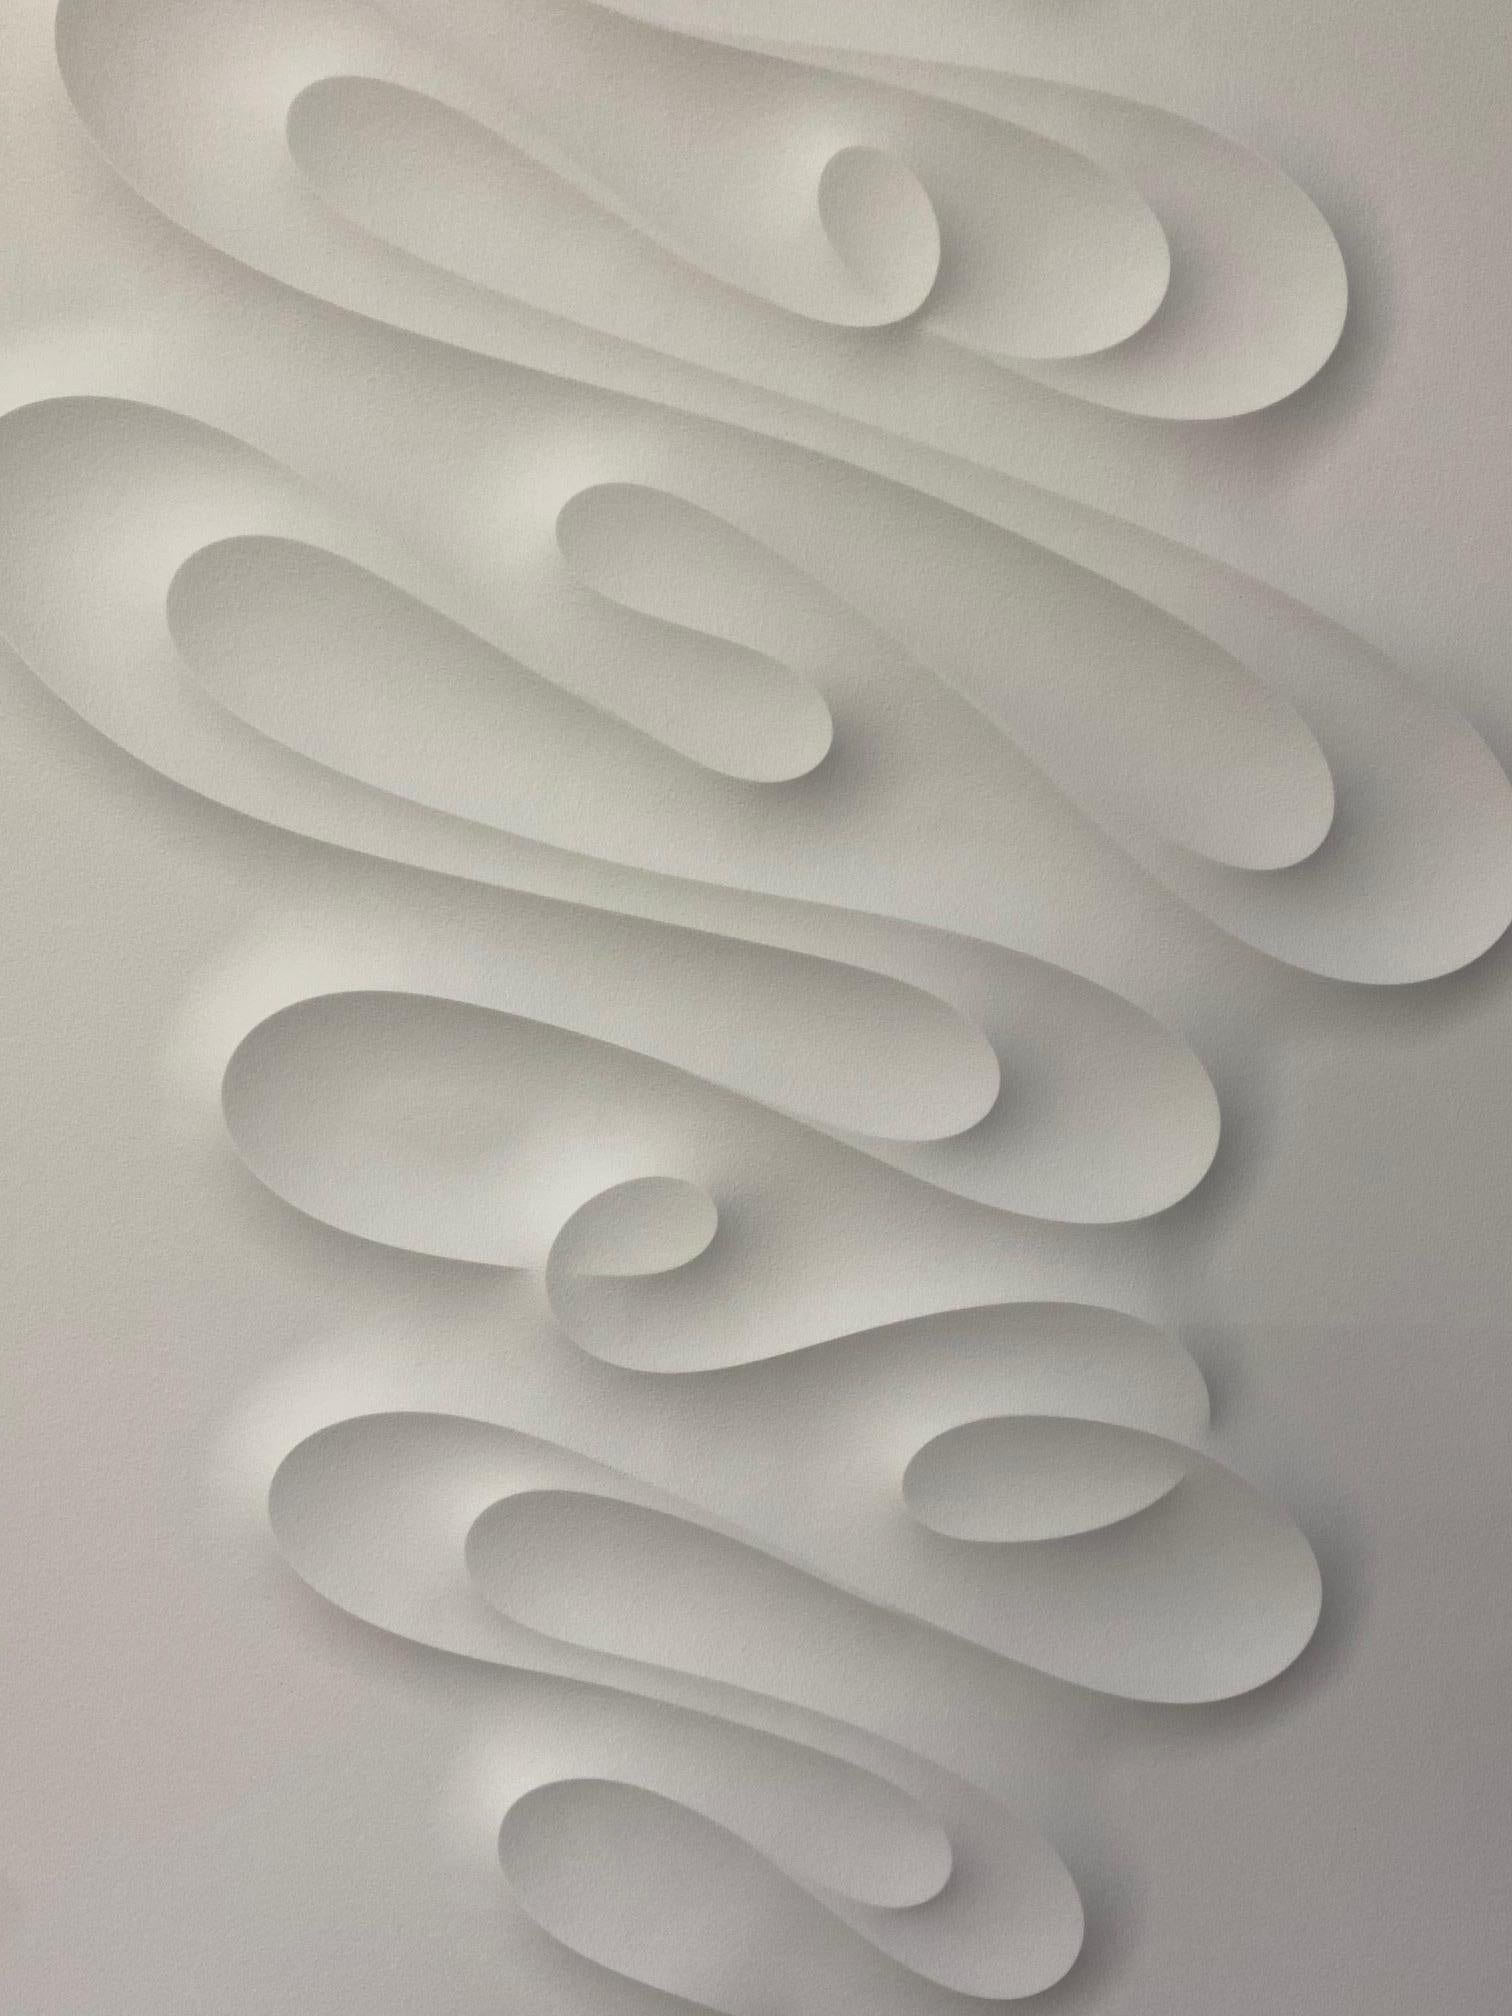 Arques - embossed paper work, minimalist curvilinear white artwork Jacinto Moros For Sale 3